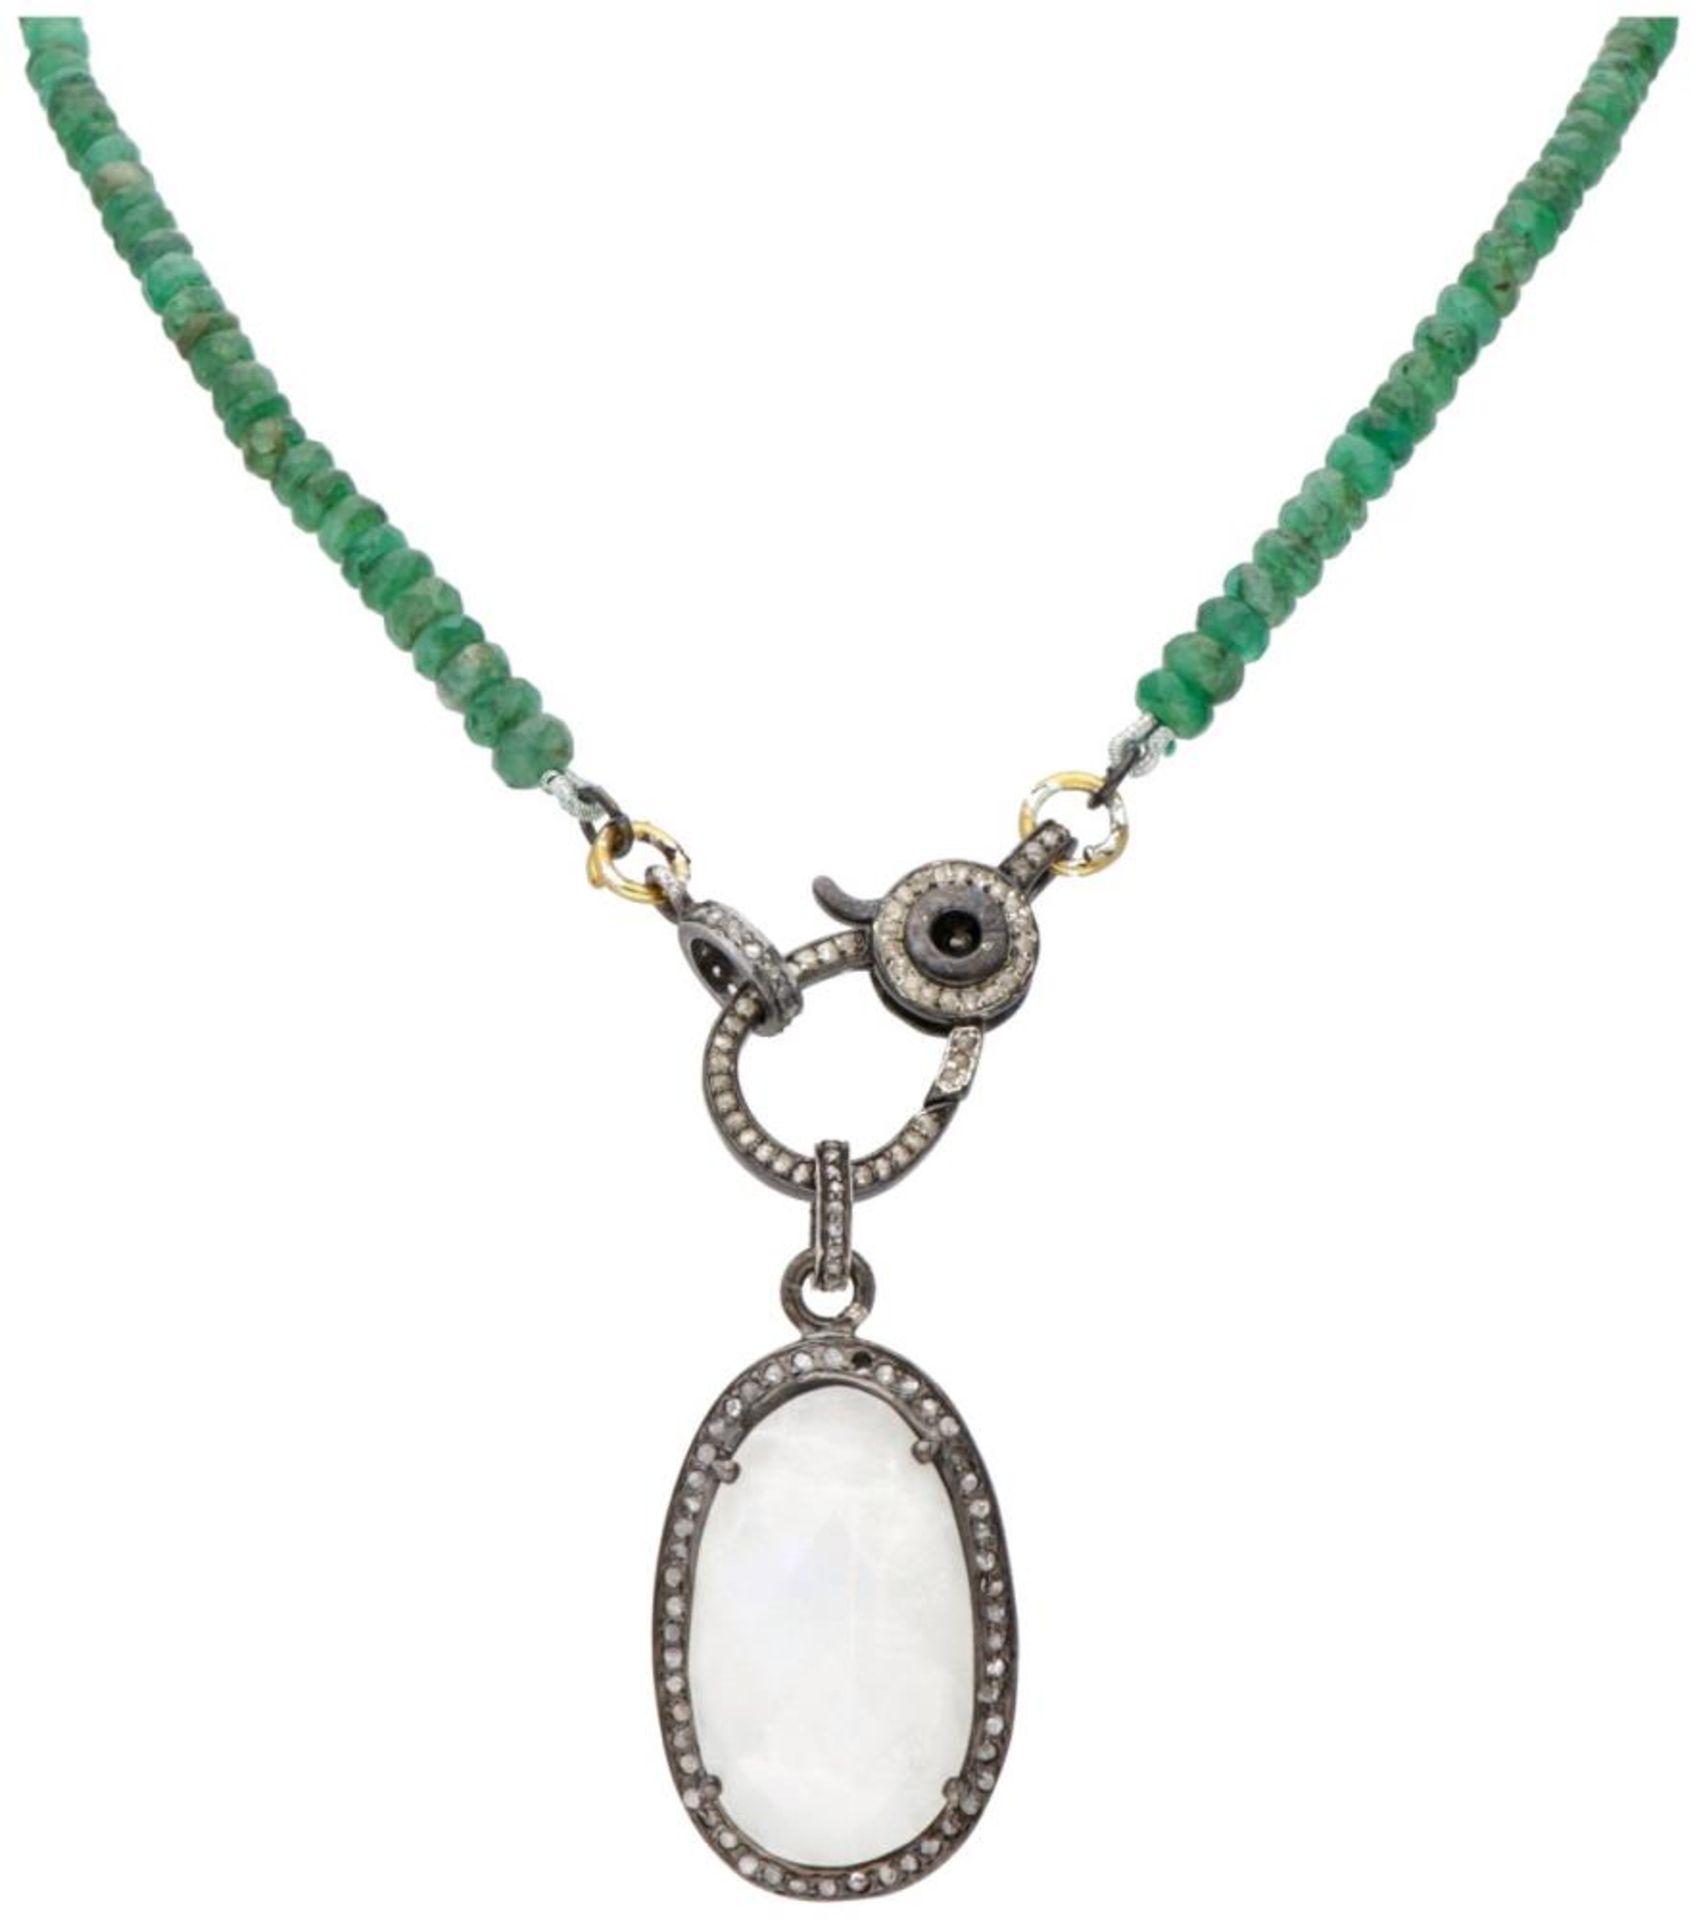 Necklace with a sterling silver closure/pendant set with moonstone and diamond.